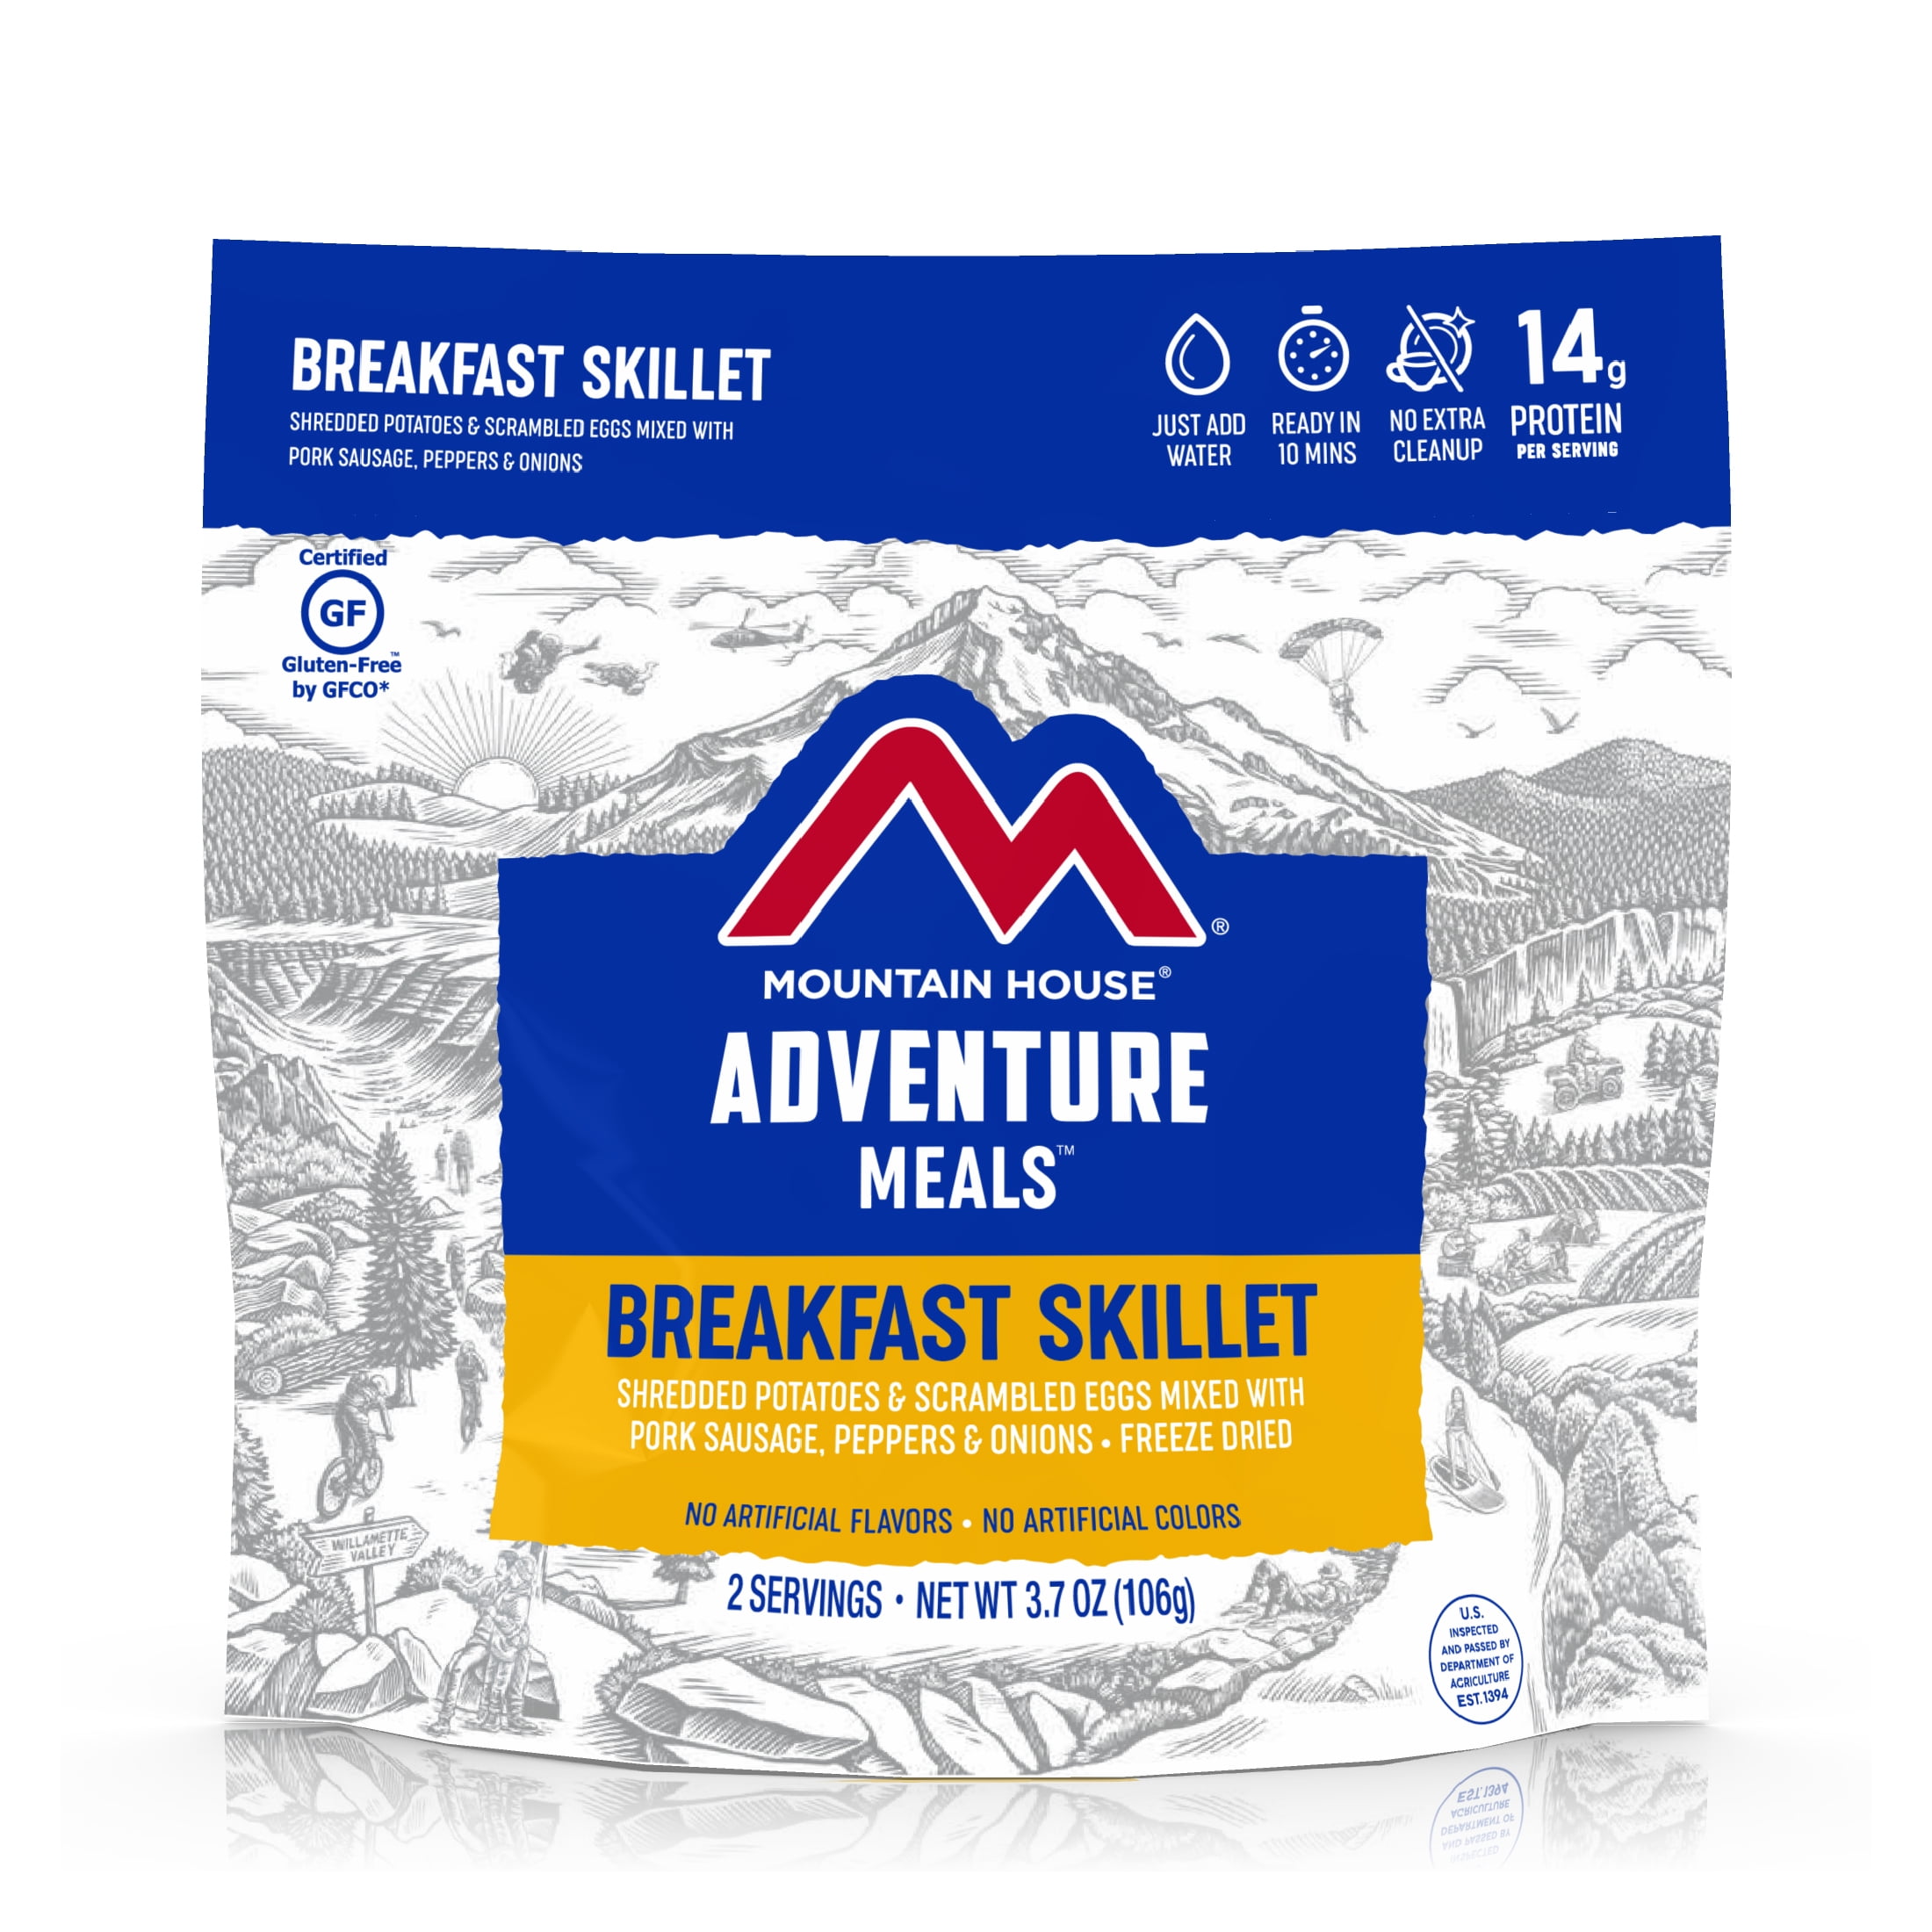 Mountain House Breakfast Skillet, Freeze-Dried Camping & Backpacking Food, 2-Serving Pouch, Gluten-Free